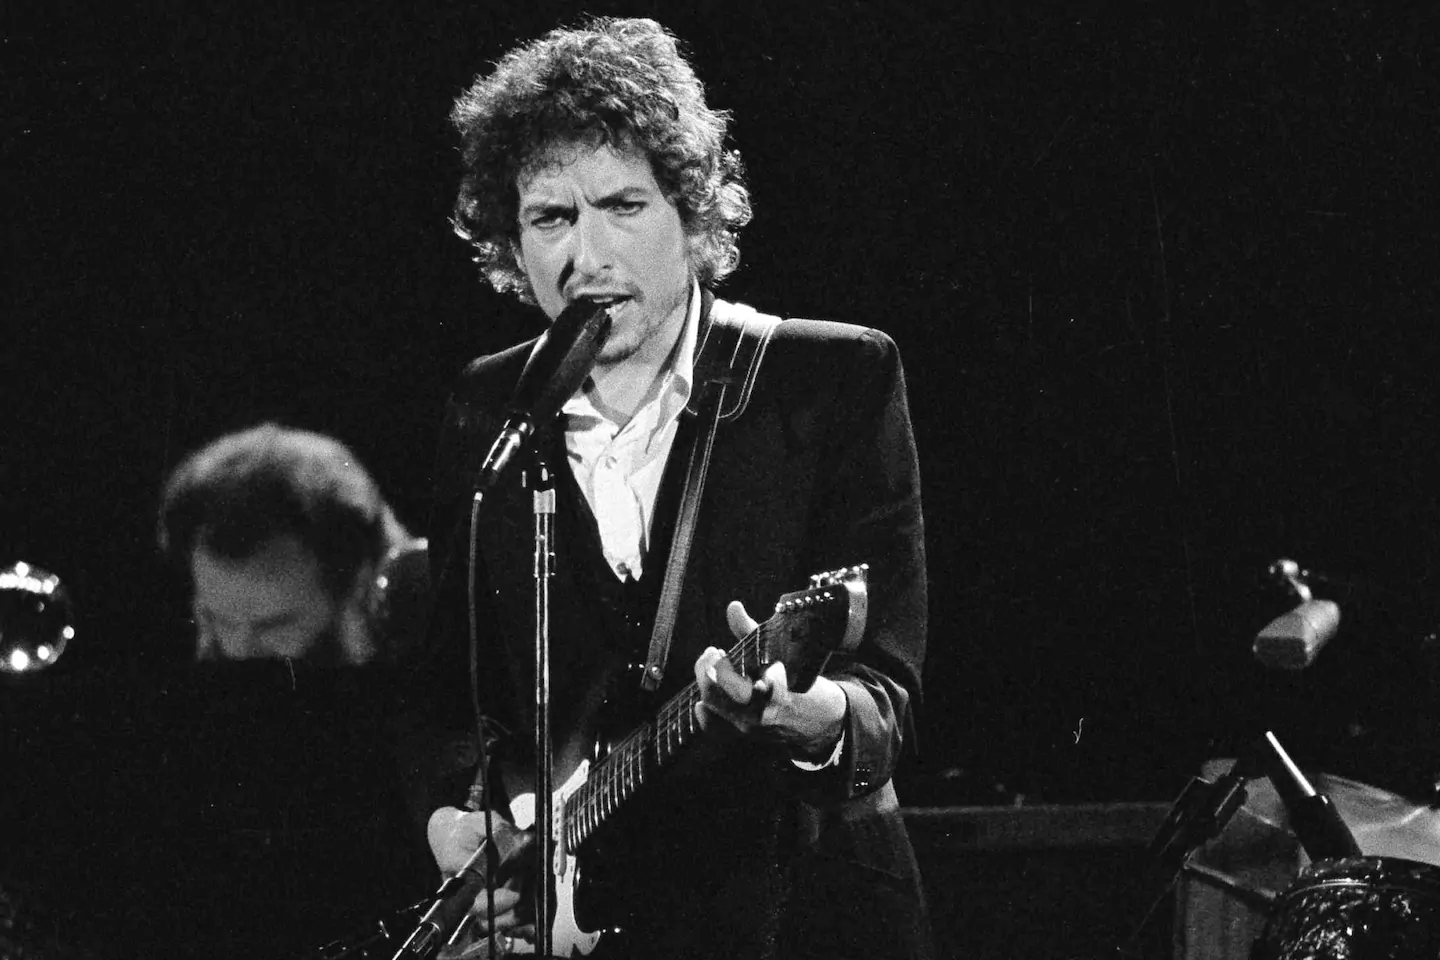 Bob Dylan sells entire song catalog to Universal Music